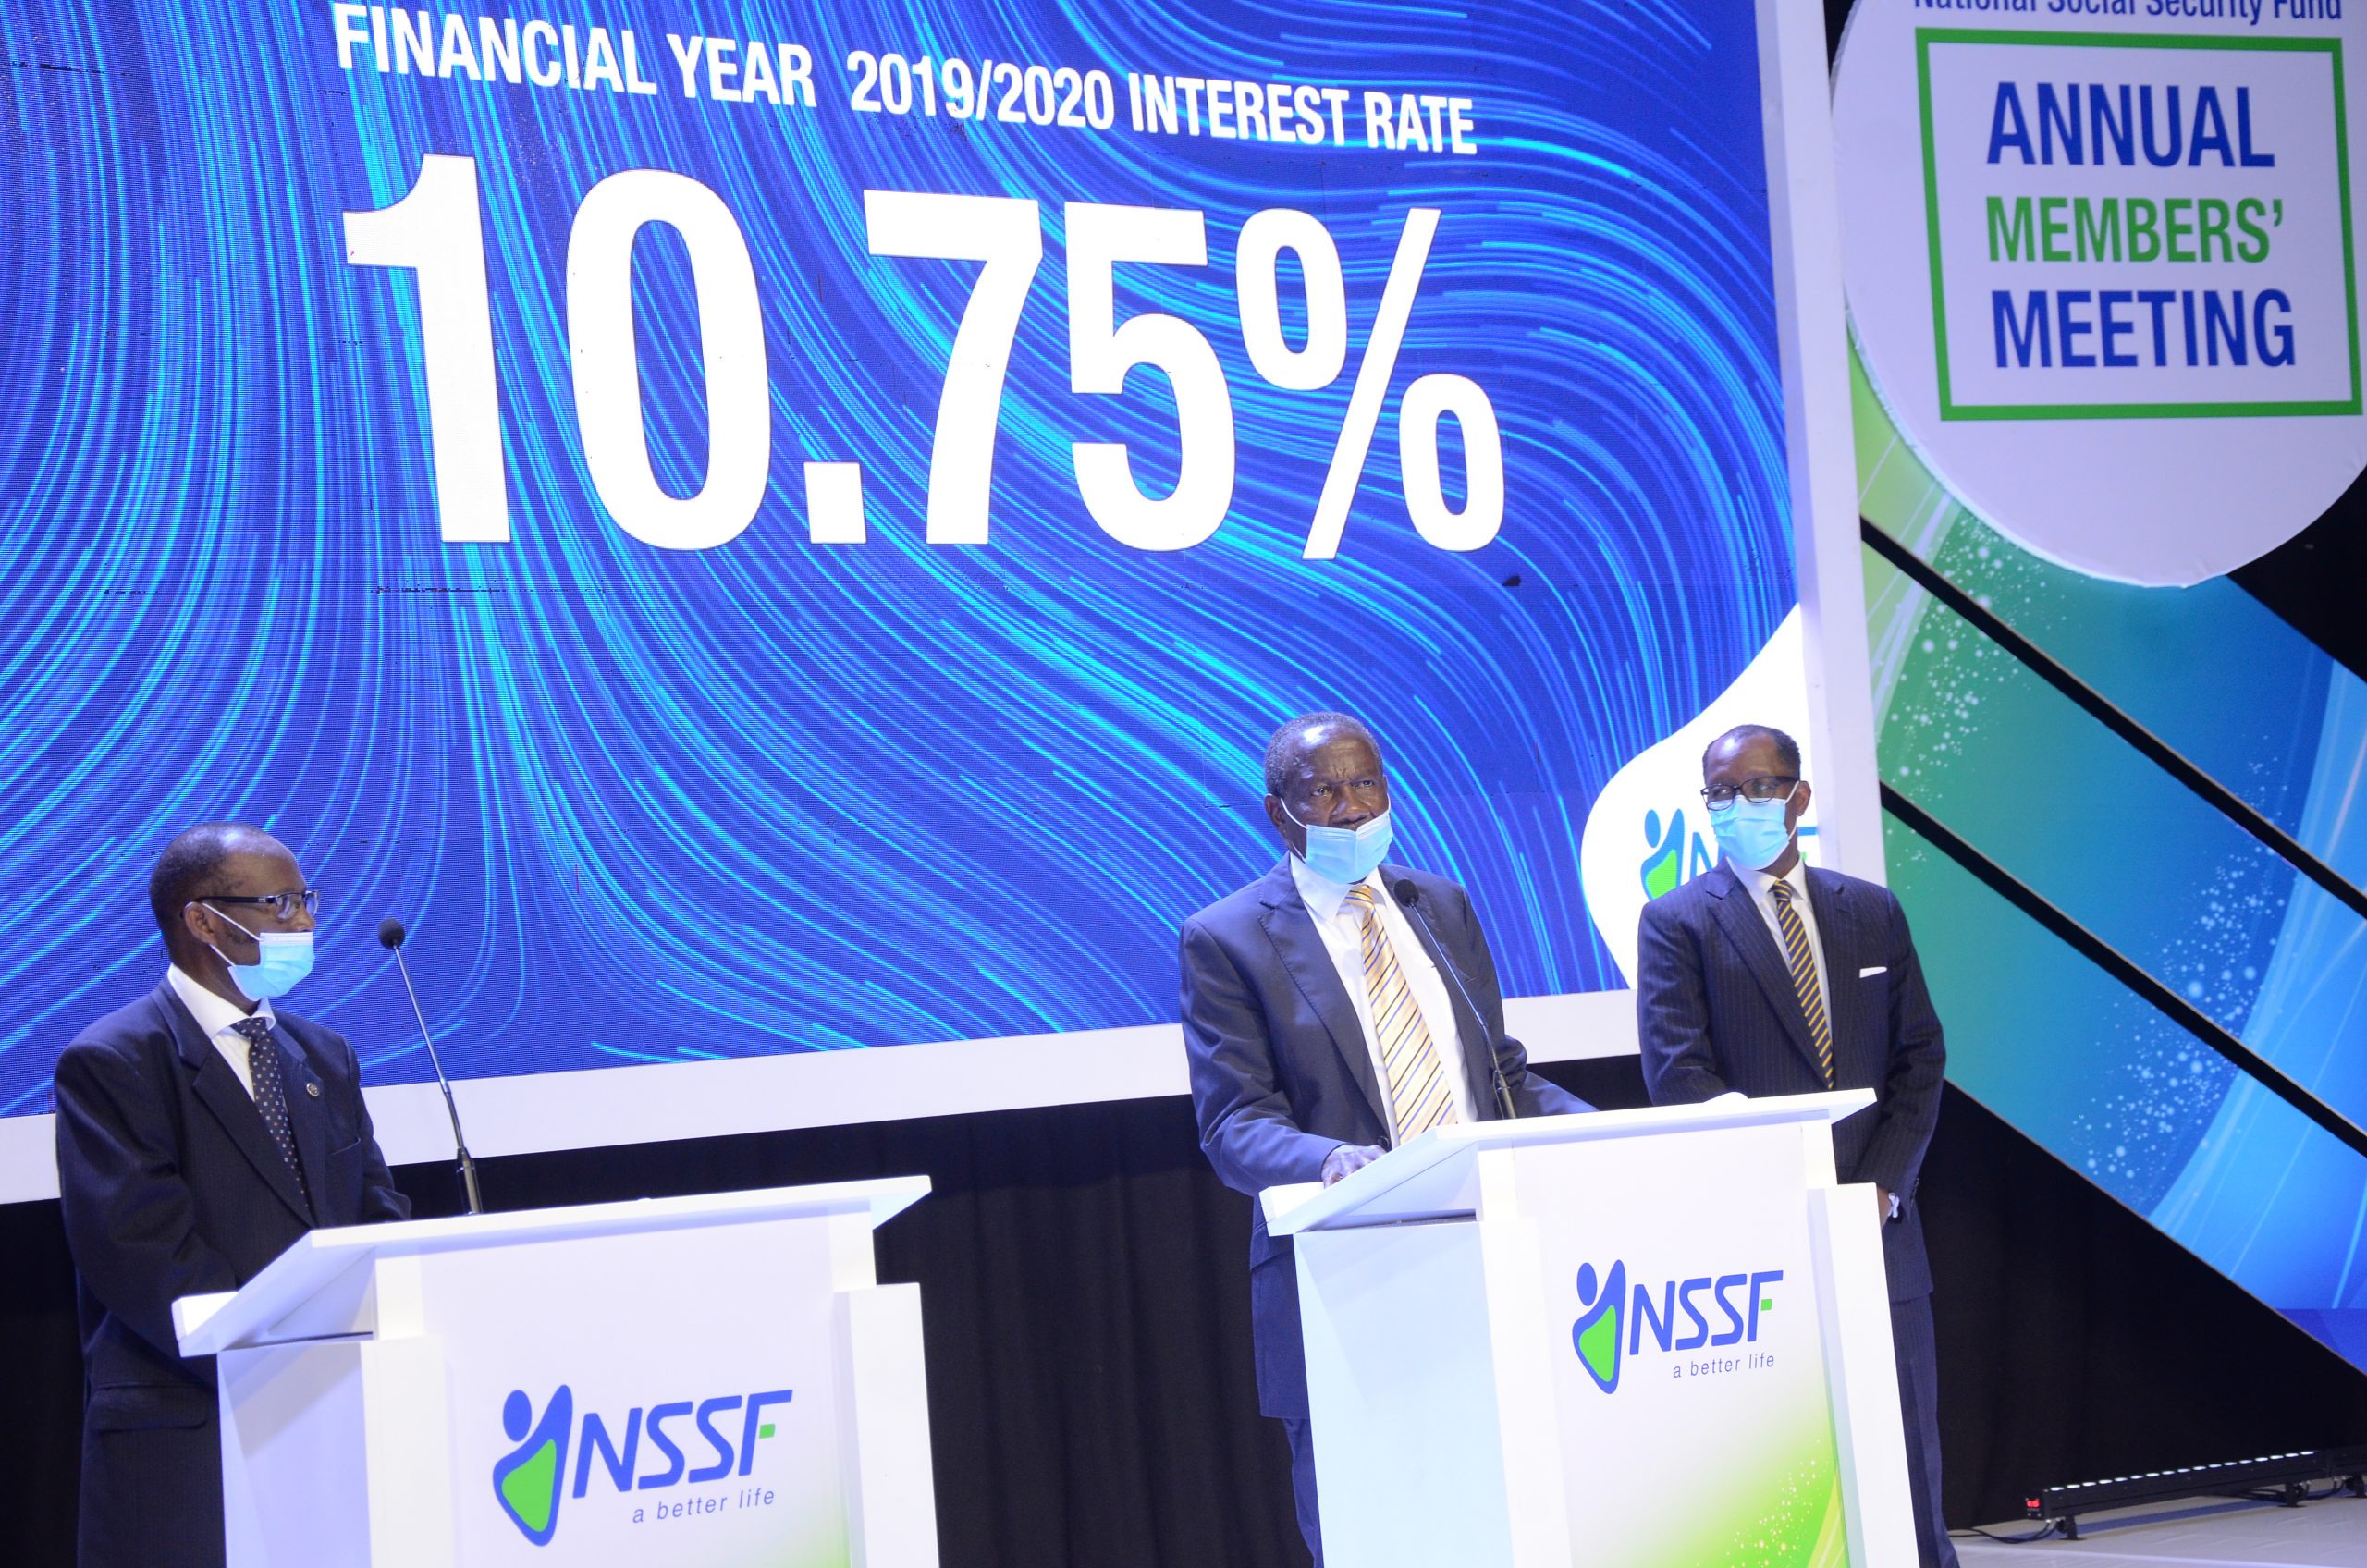 NSSF declares 10.75% interest rate to members for FY 2019/20 - Eagle Online